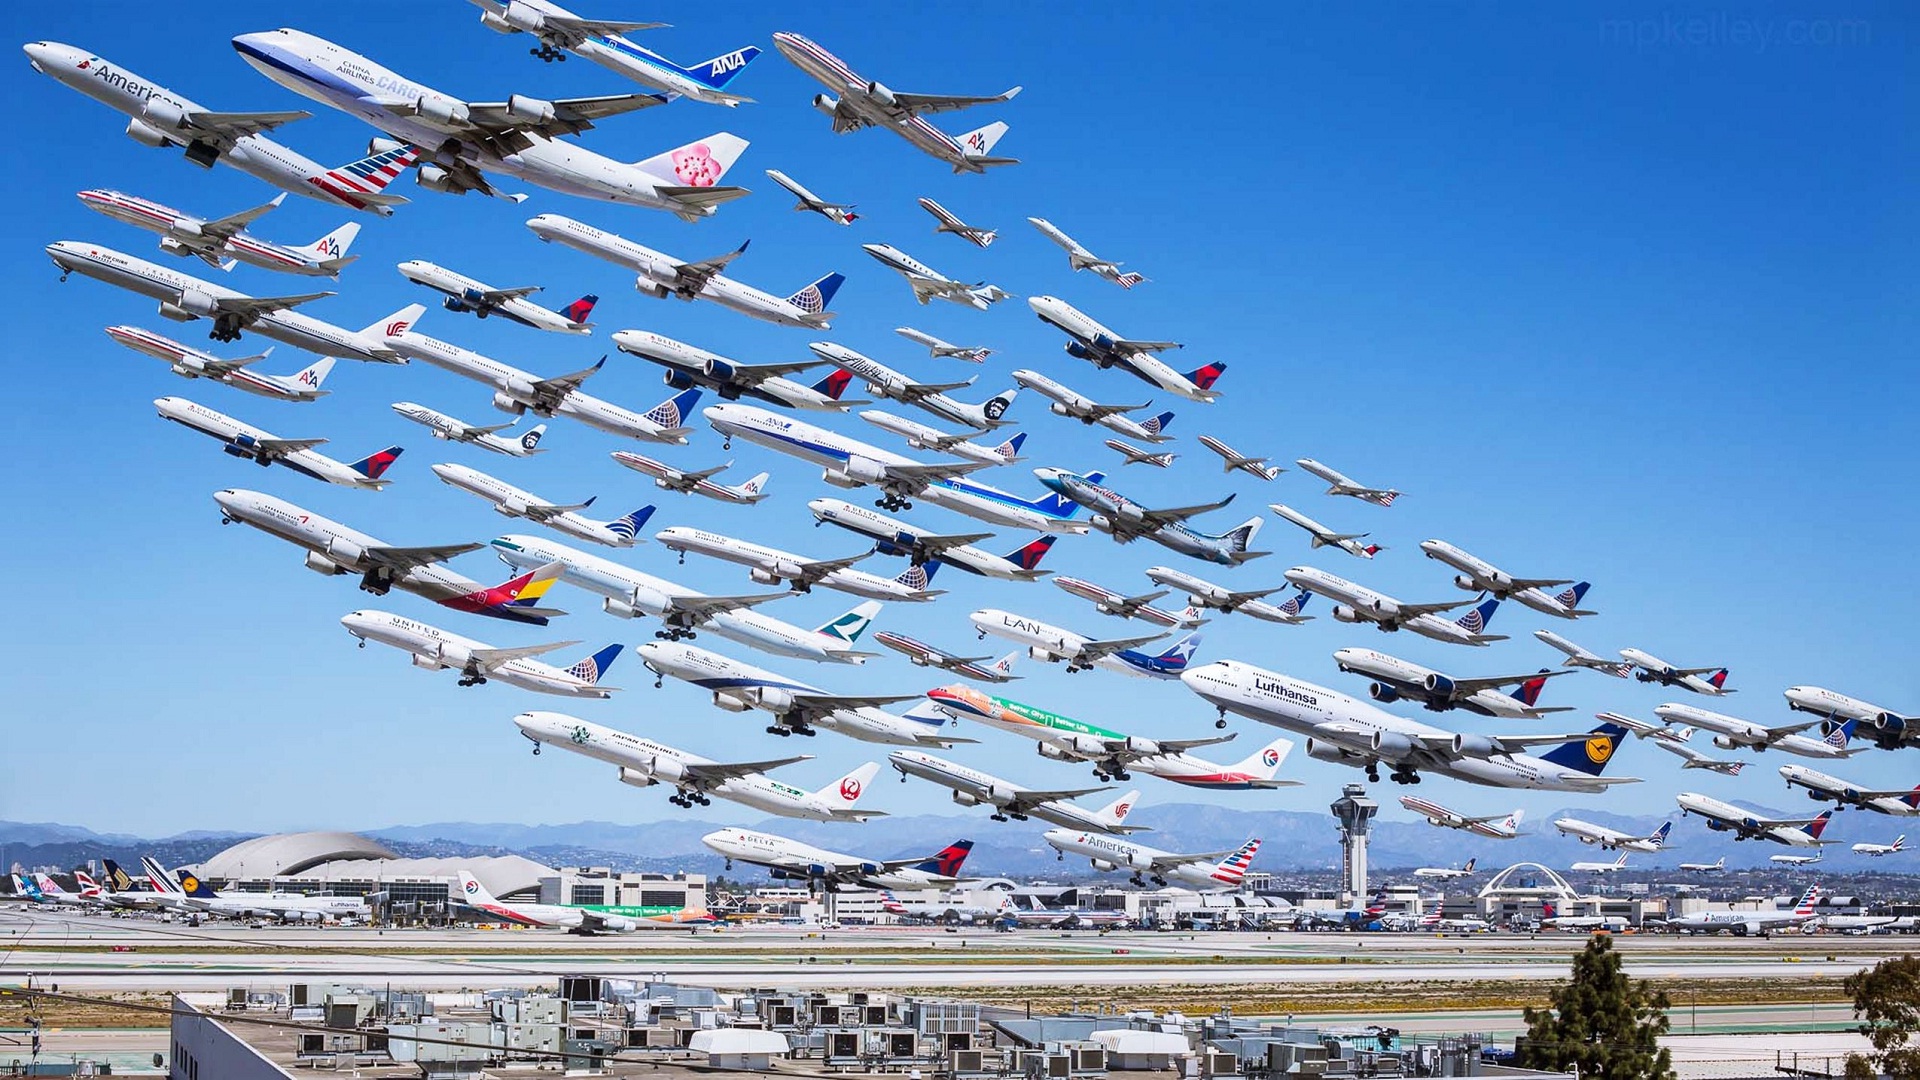 100 Planes Fly Unseen Unique Hd Wallpapers Free Download - Los Angeles Airplanes - HD Wallpaper 